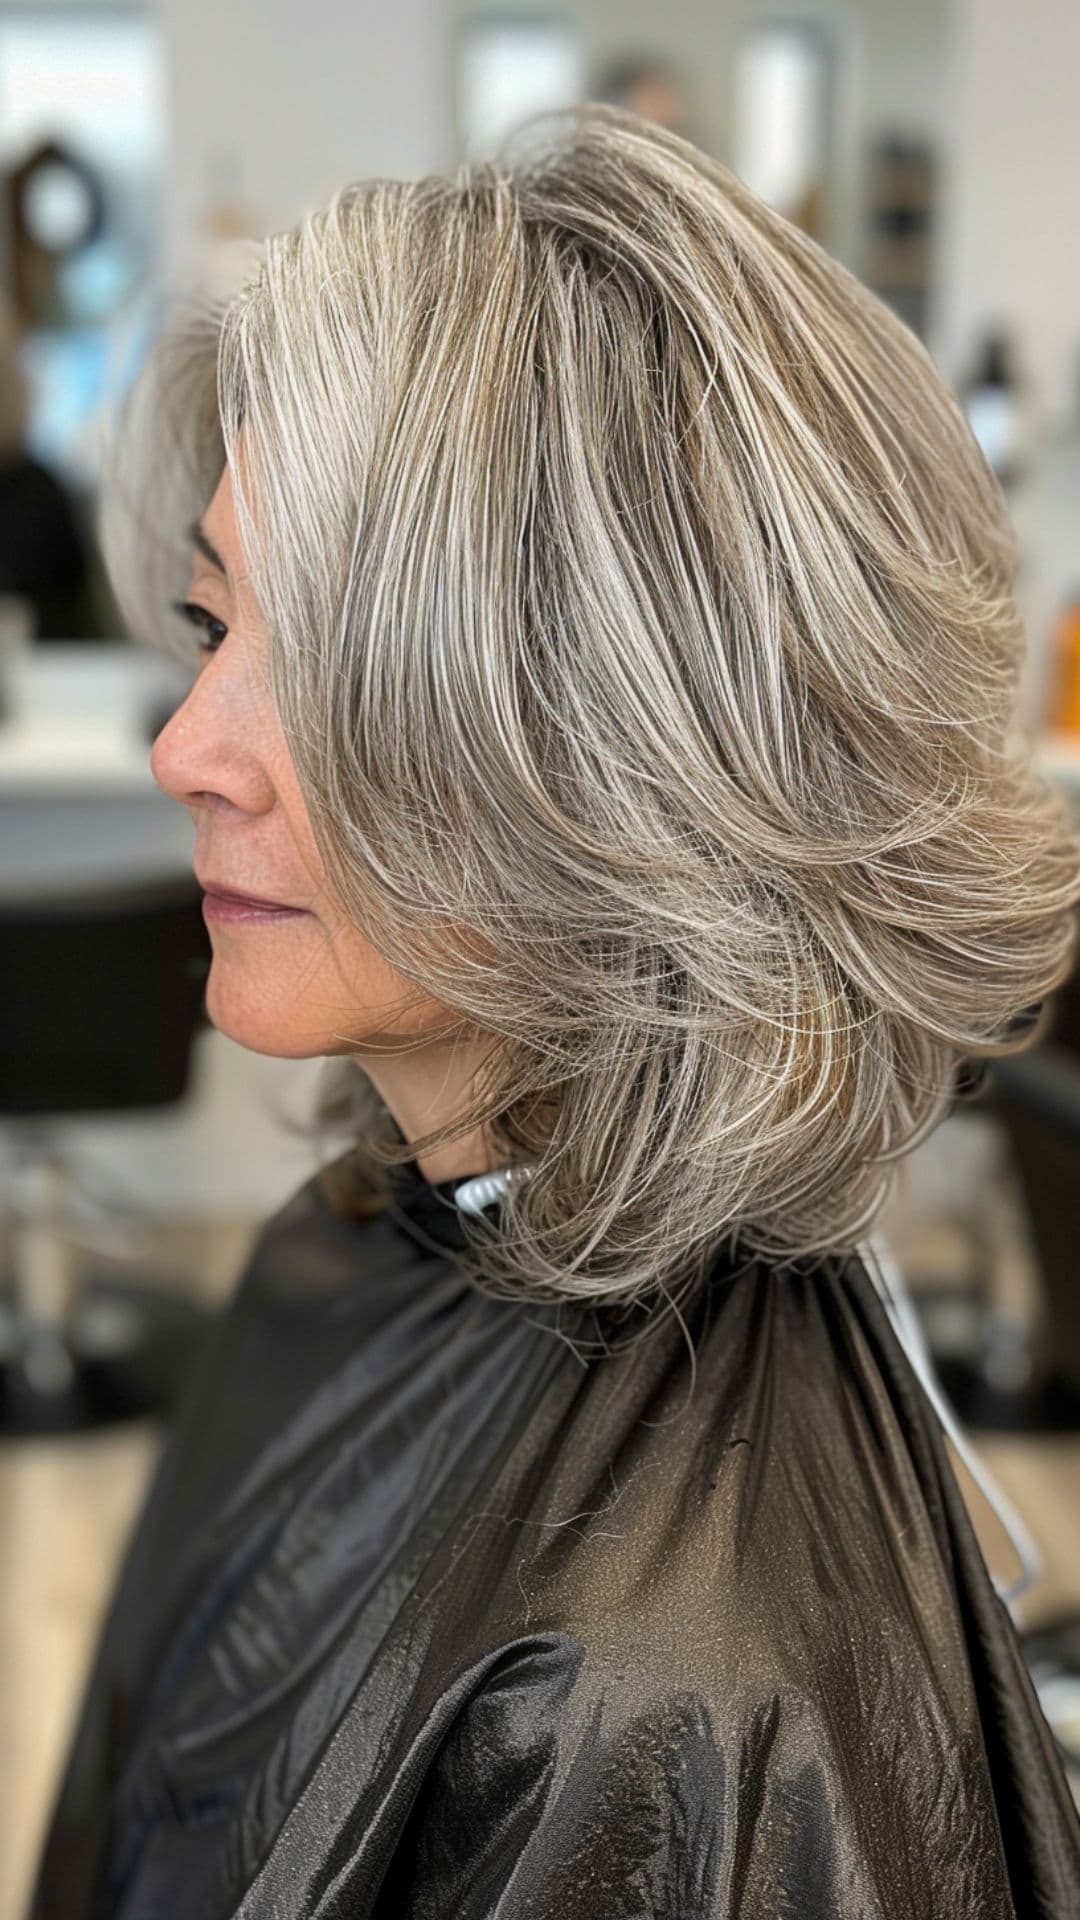 An old woman modelling a natural grey hair with lowlights.